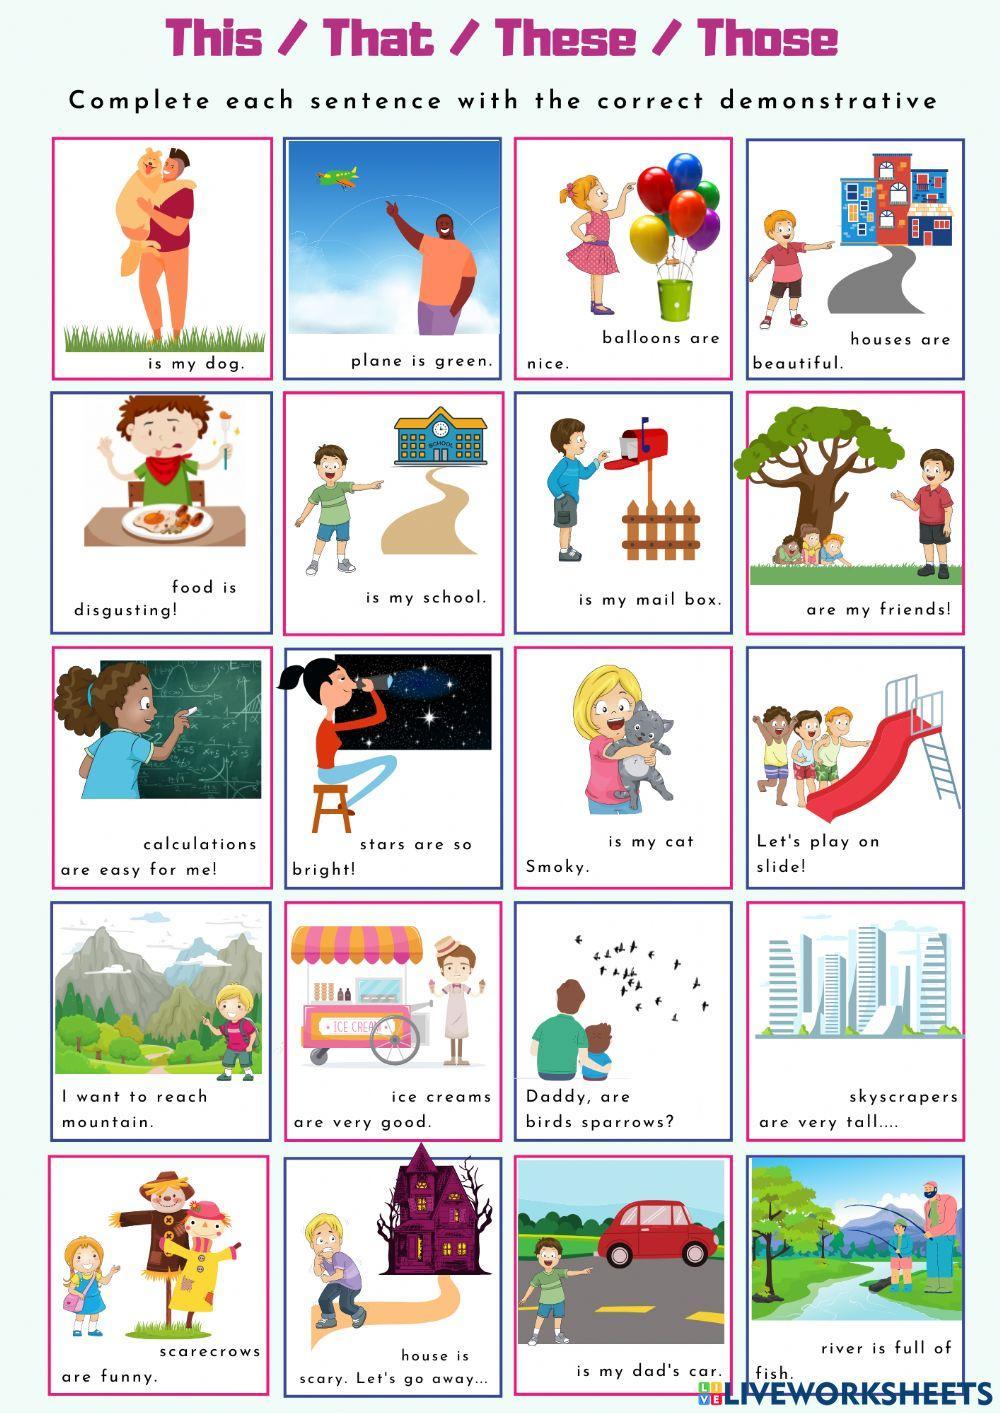 Demonstratives - This, that, these, those